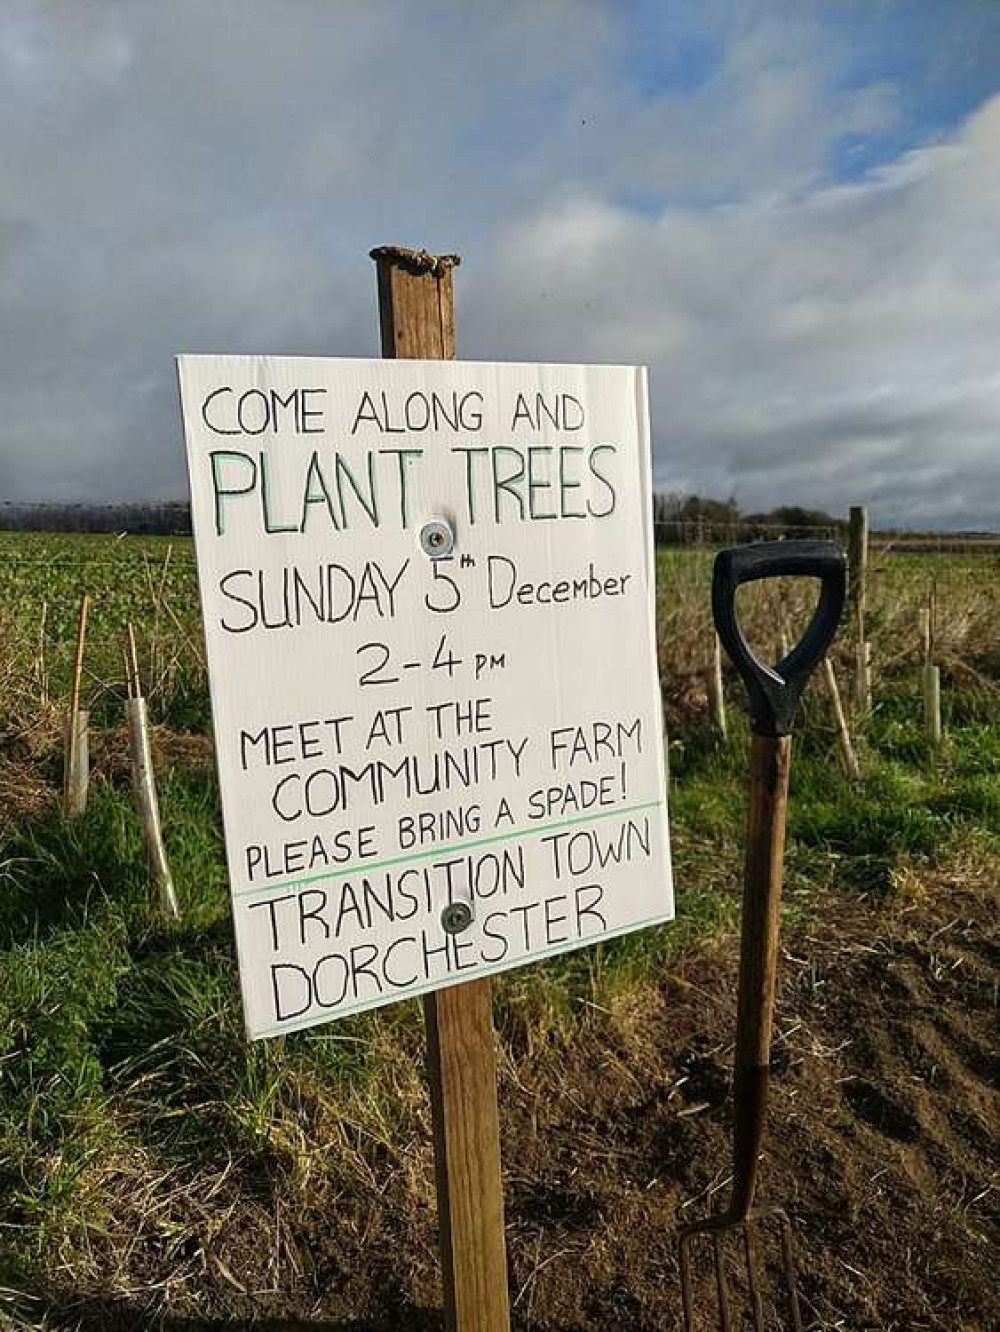 Transition Town Dorchester is looking for volunteers to help plant trees